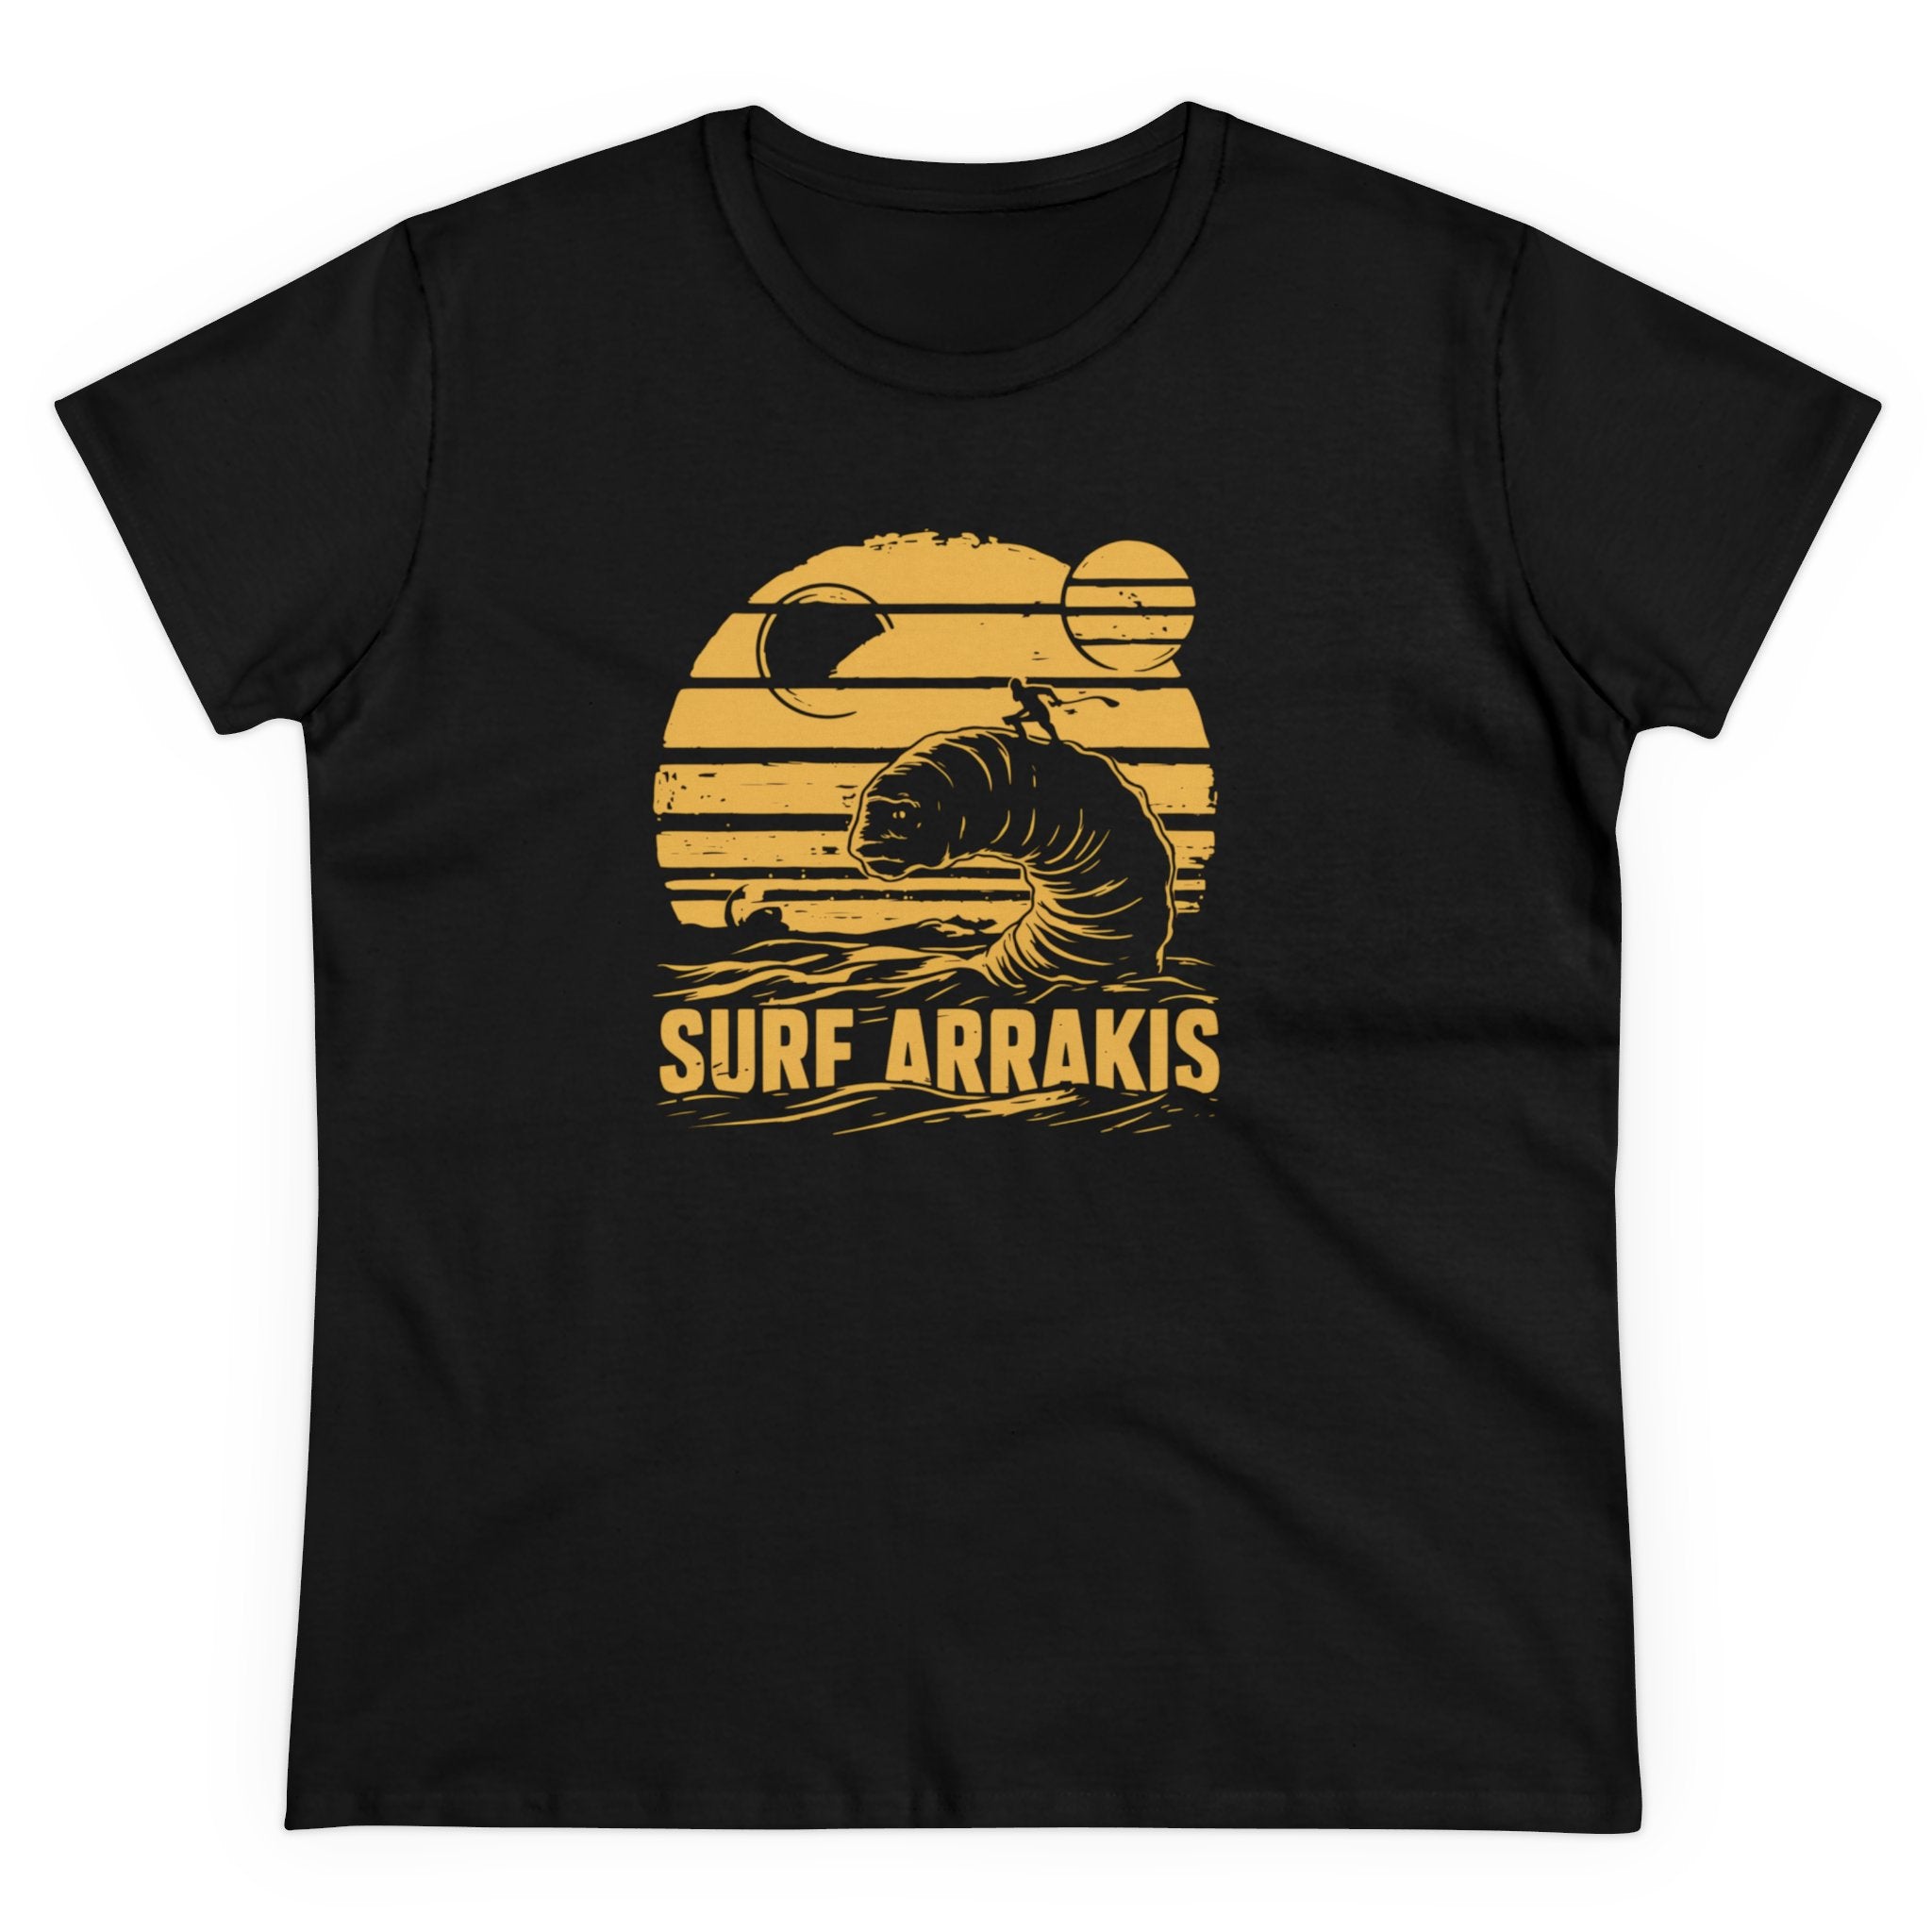 Black T-shirt featuring a yellow graphic of a sandworm in ocean waves with two moons and the text "SURF ARRAKIS" below. The Surf Arrakis - Women's Tee offers a pre-shrunk, comfy design made from soft light cotton for ultimate comfort.